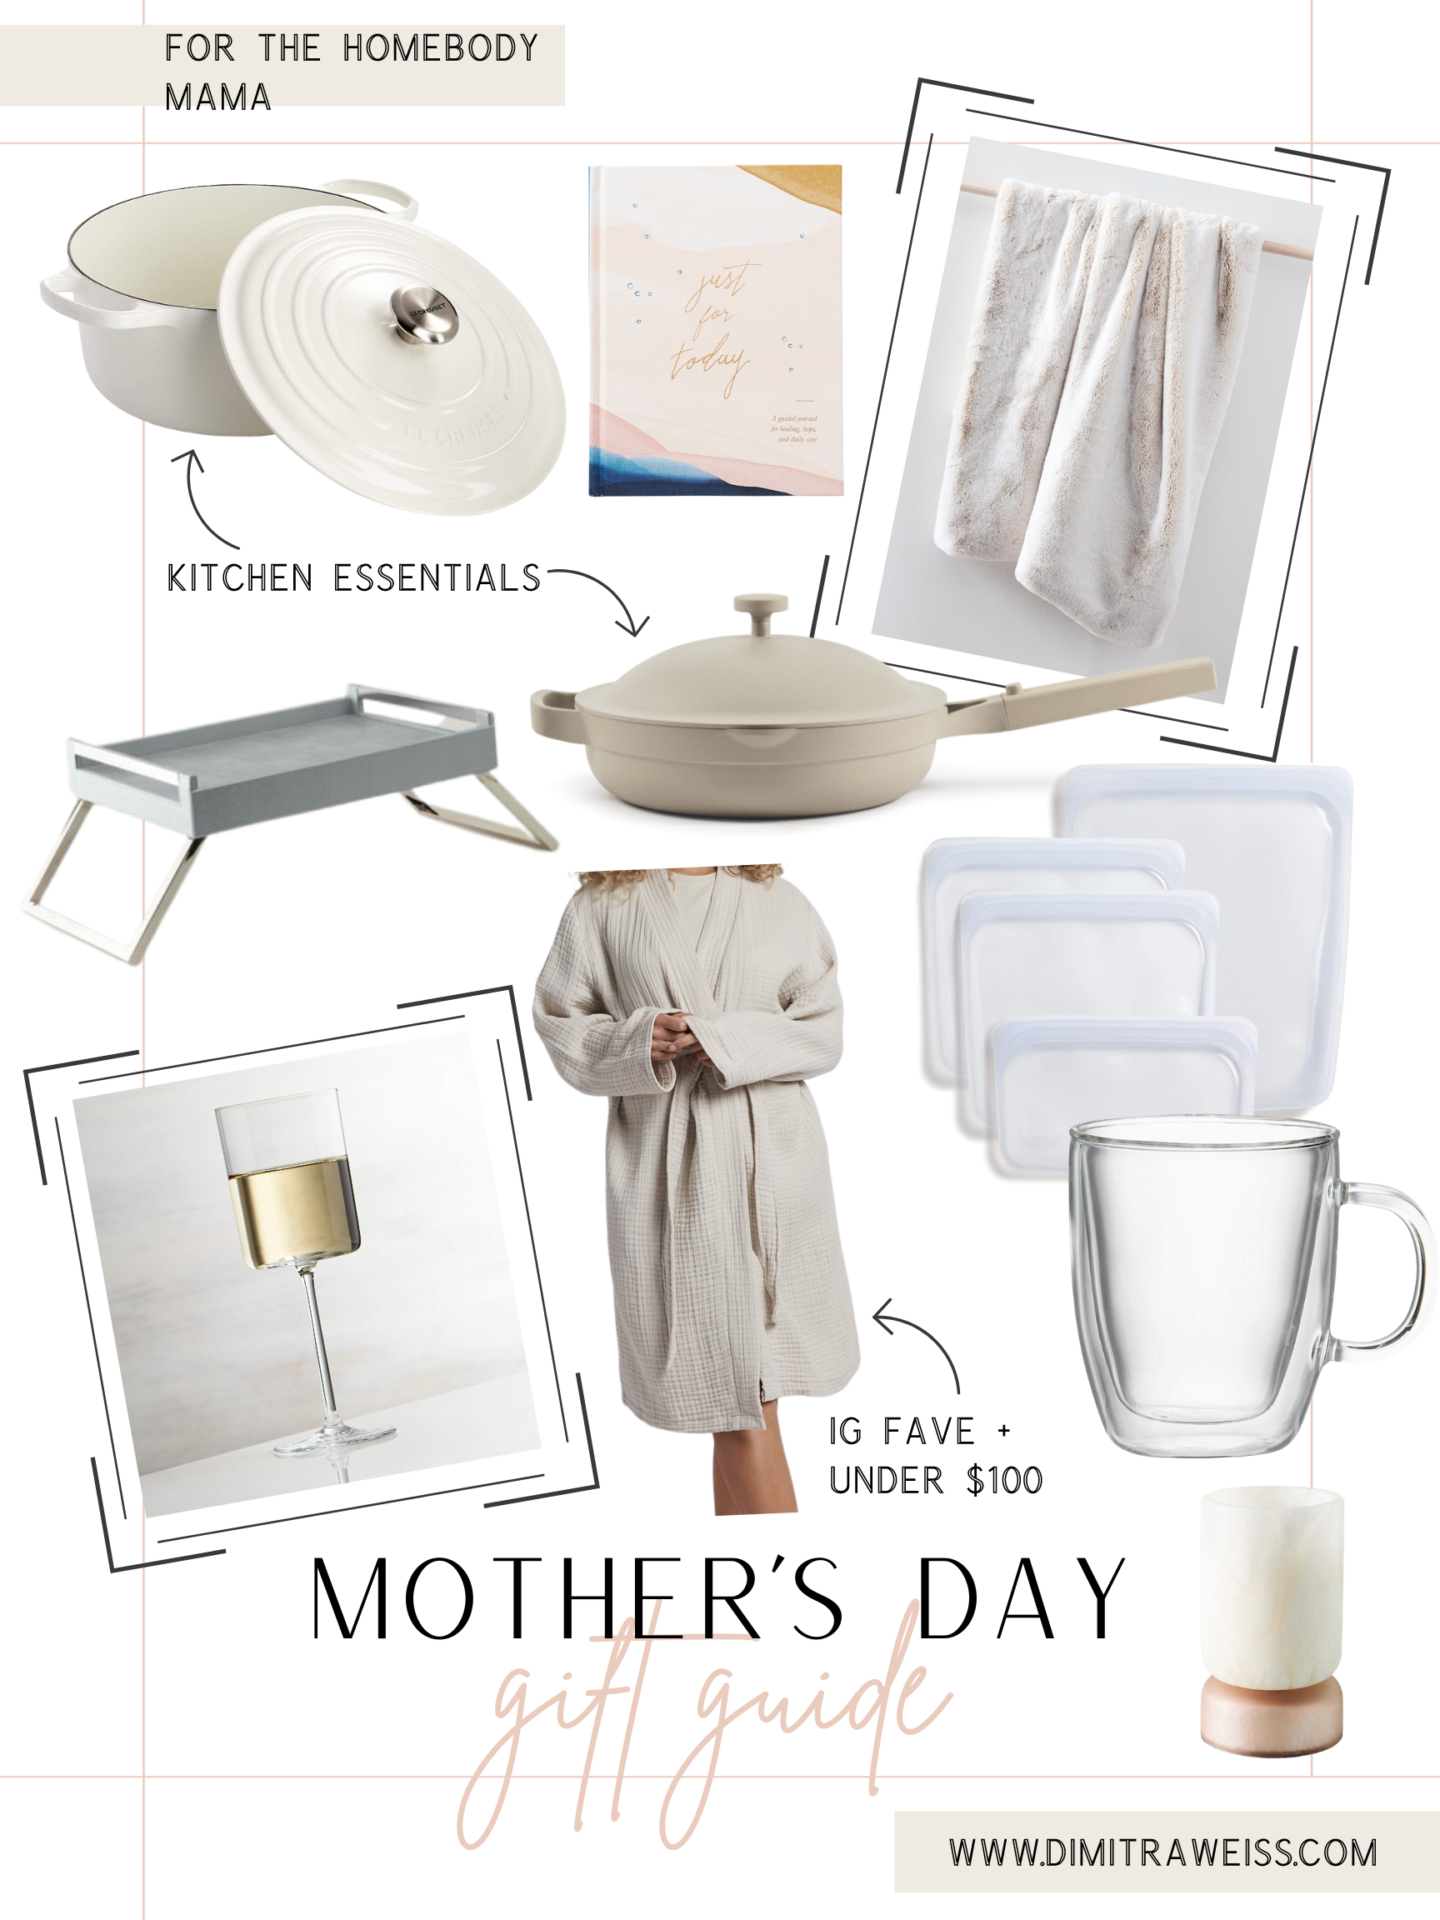 https://dimitraweiss.com/wp-content/uploads/2021/05/homebody-mama-gift-guide-mothers-day-1440x1920.png